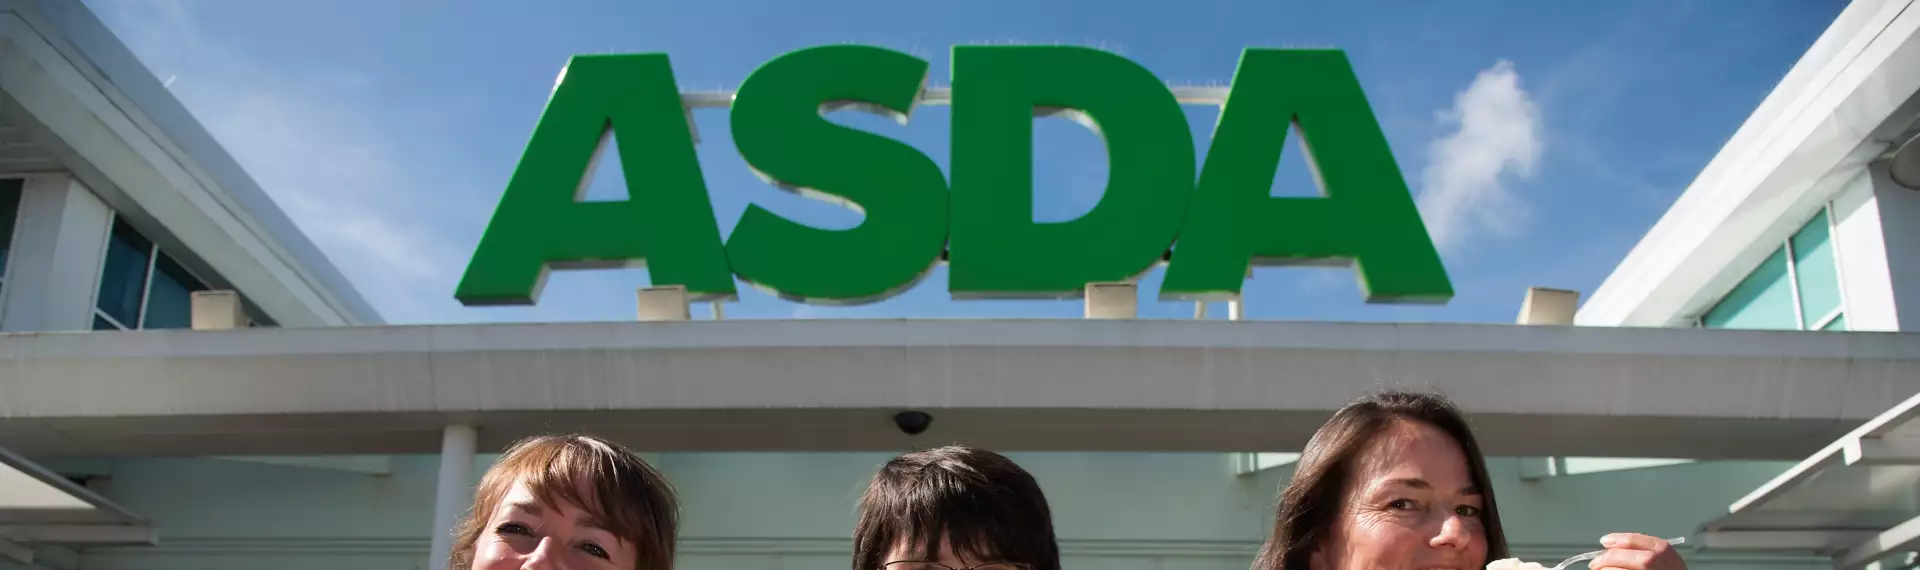 Swansea supplier has a hit year with Asda